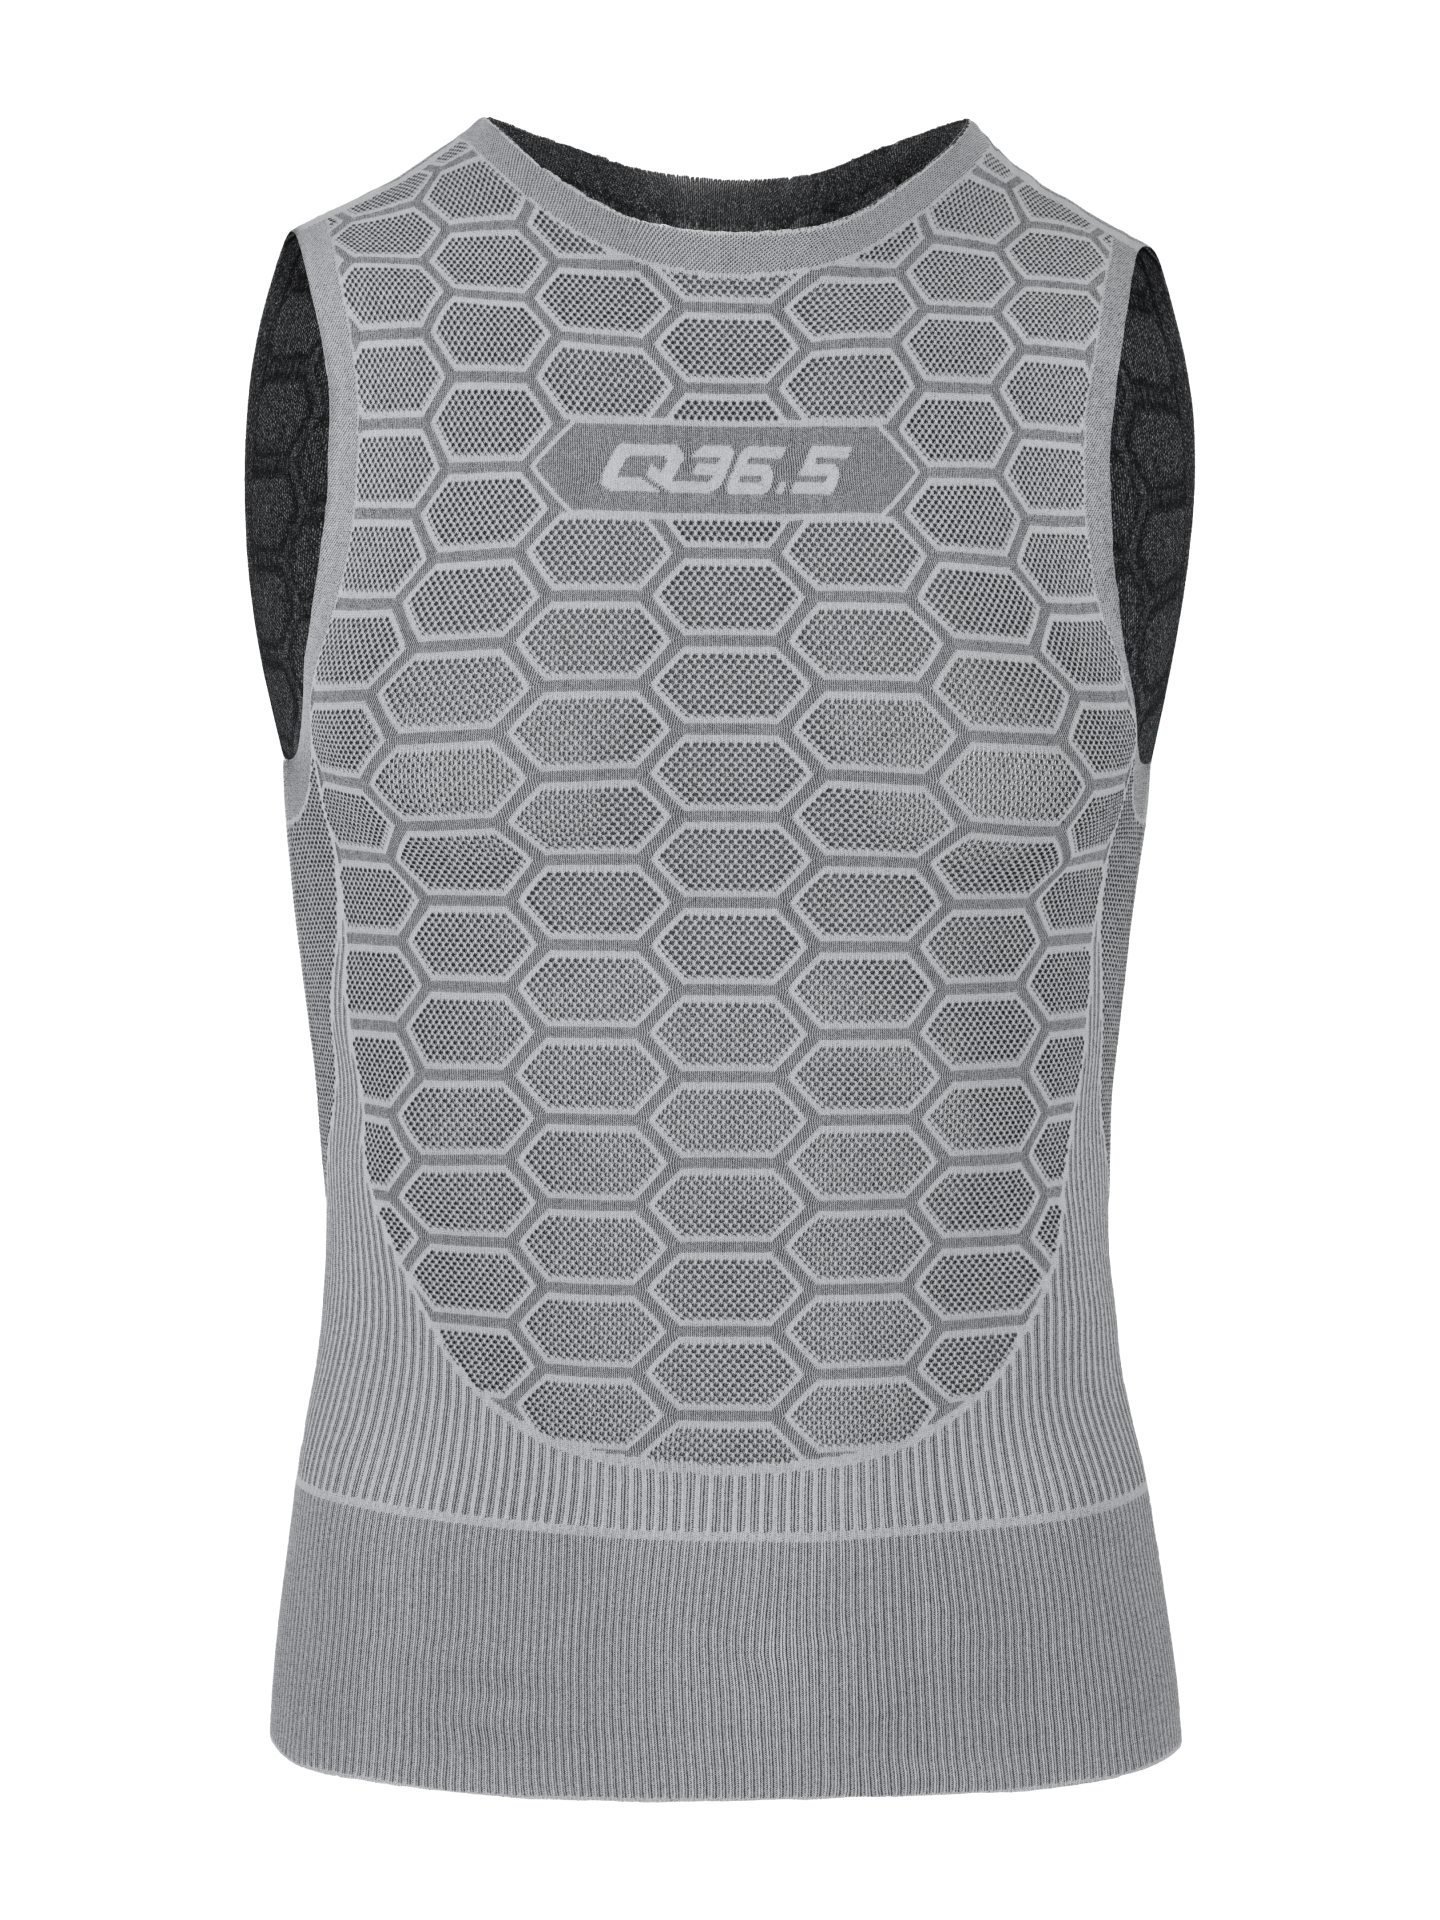 Base Layer 3 Long Sleeve Anthracite Grey